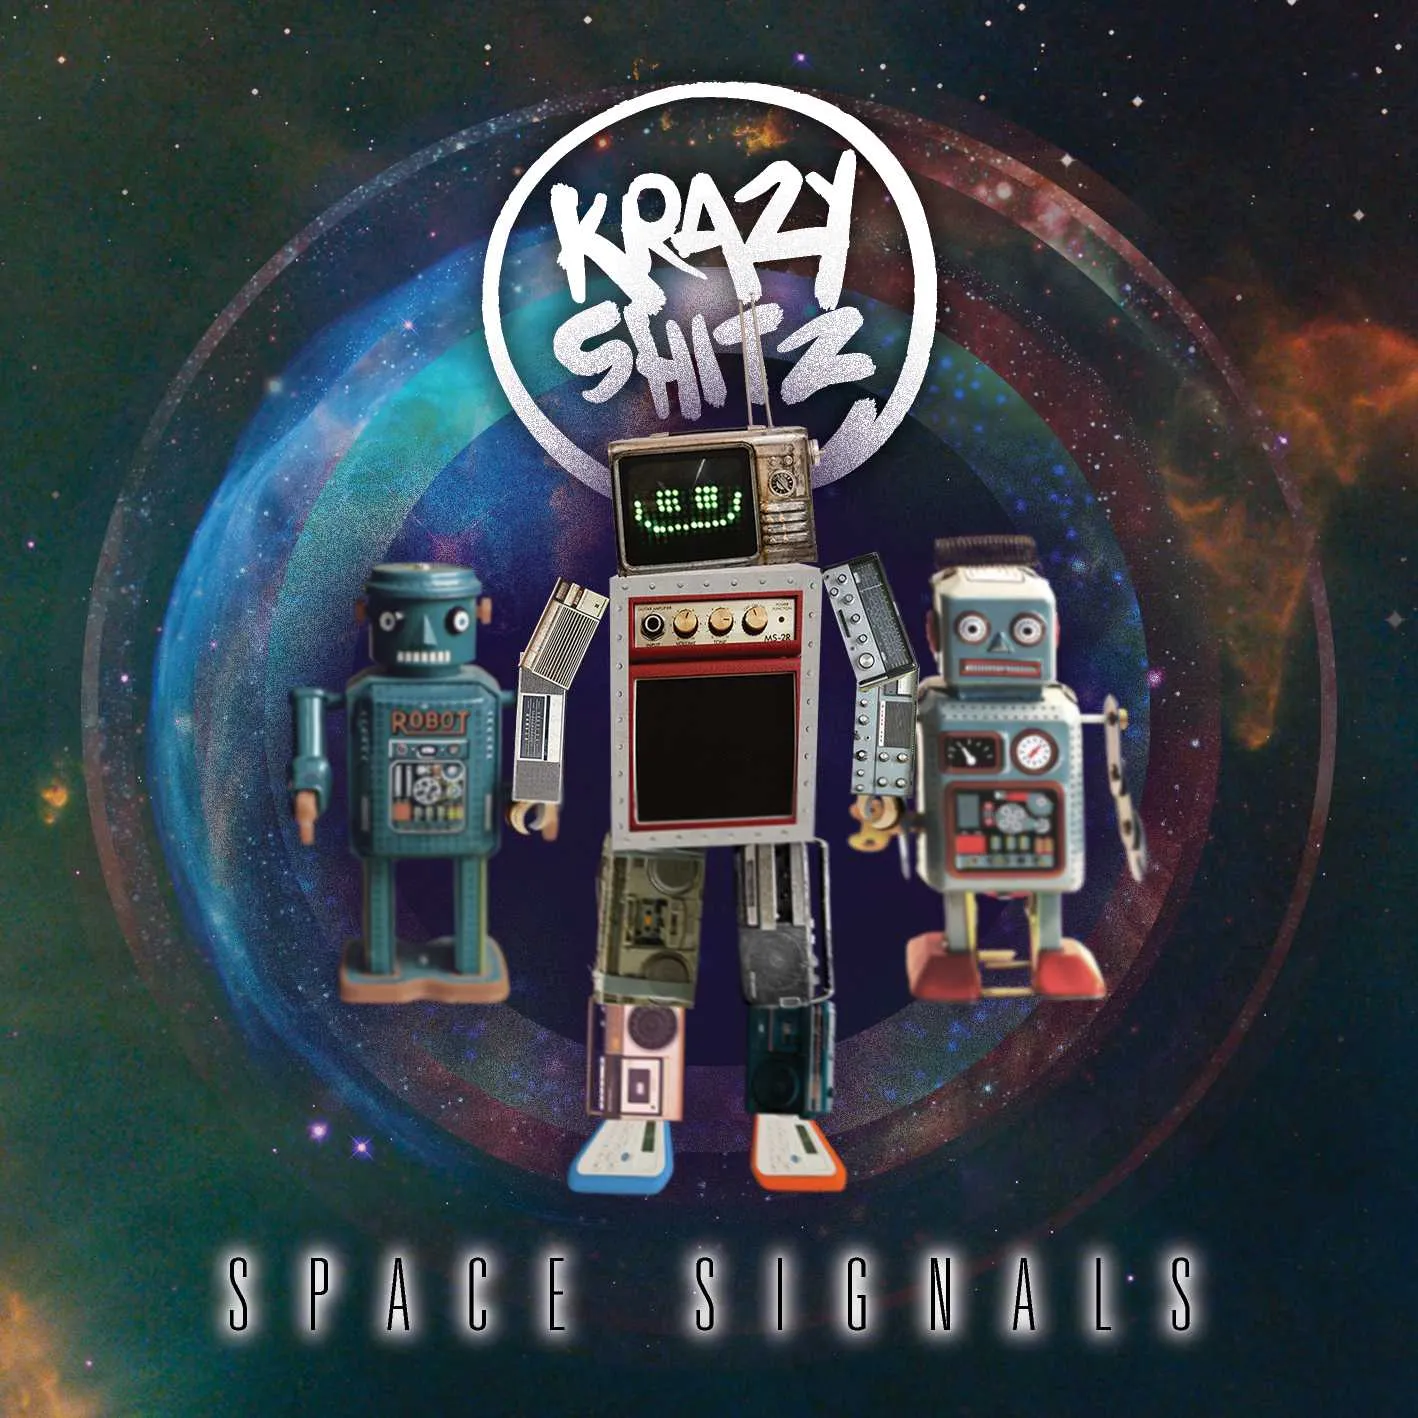 Cover of “Space Signals” by Krazy Shitz